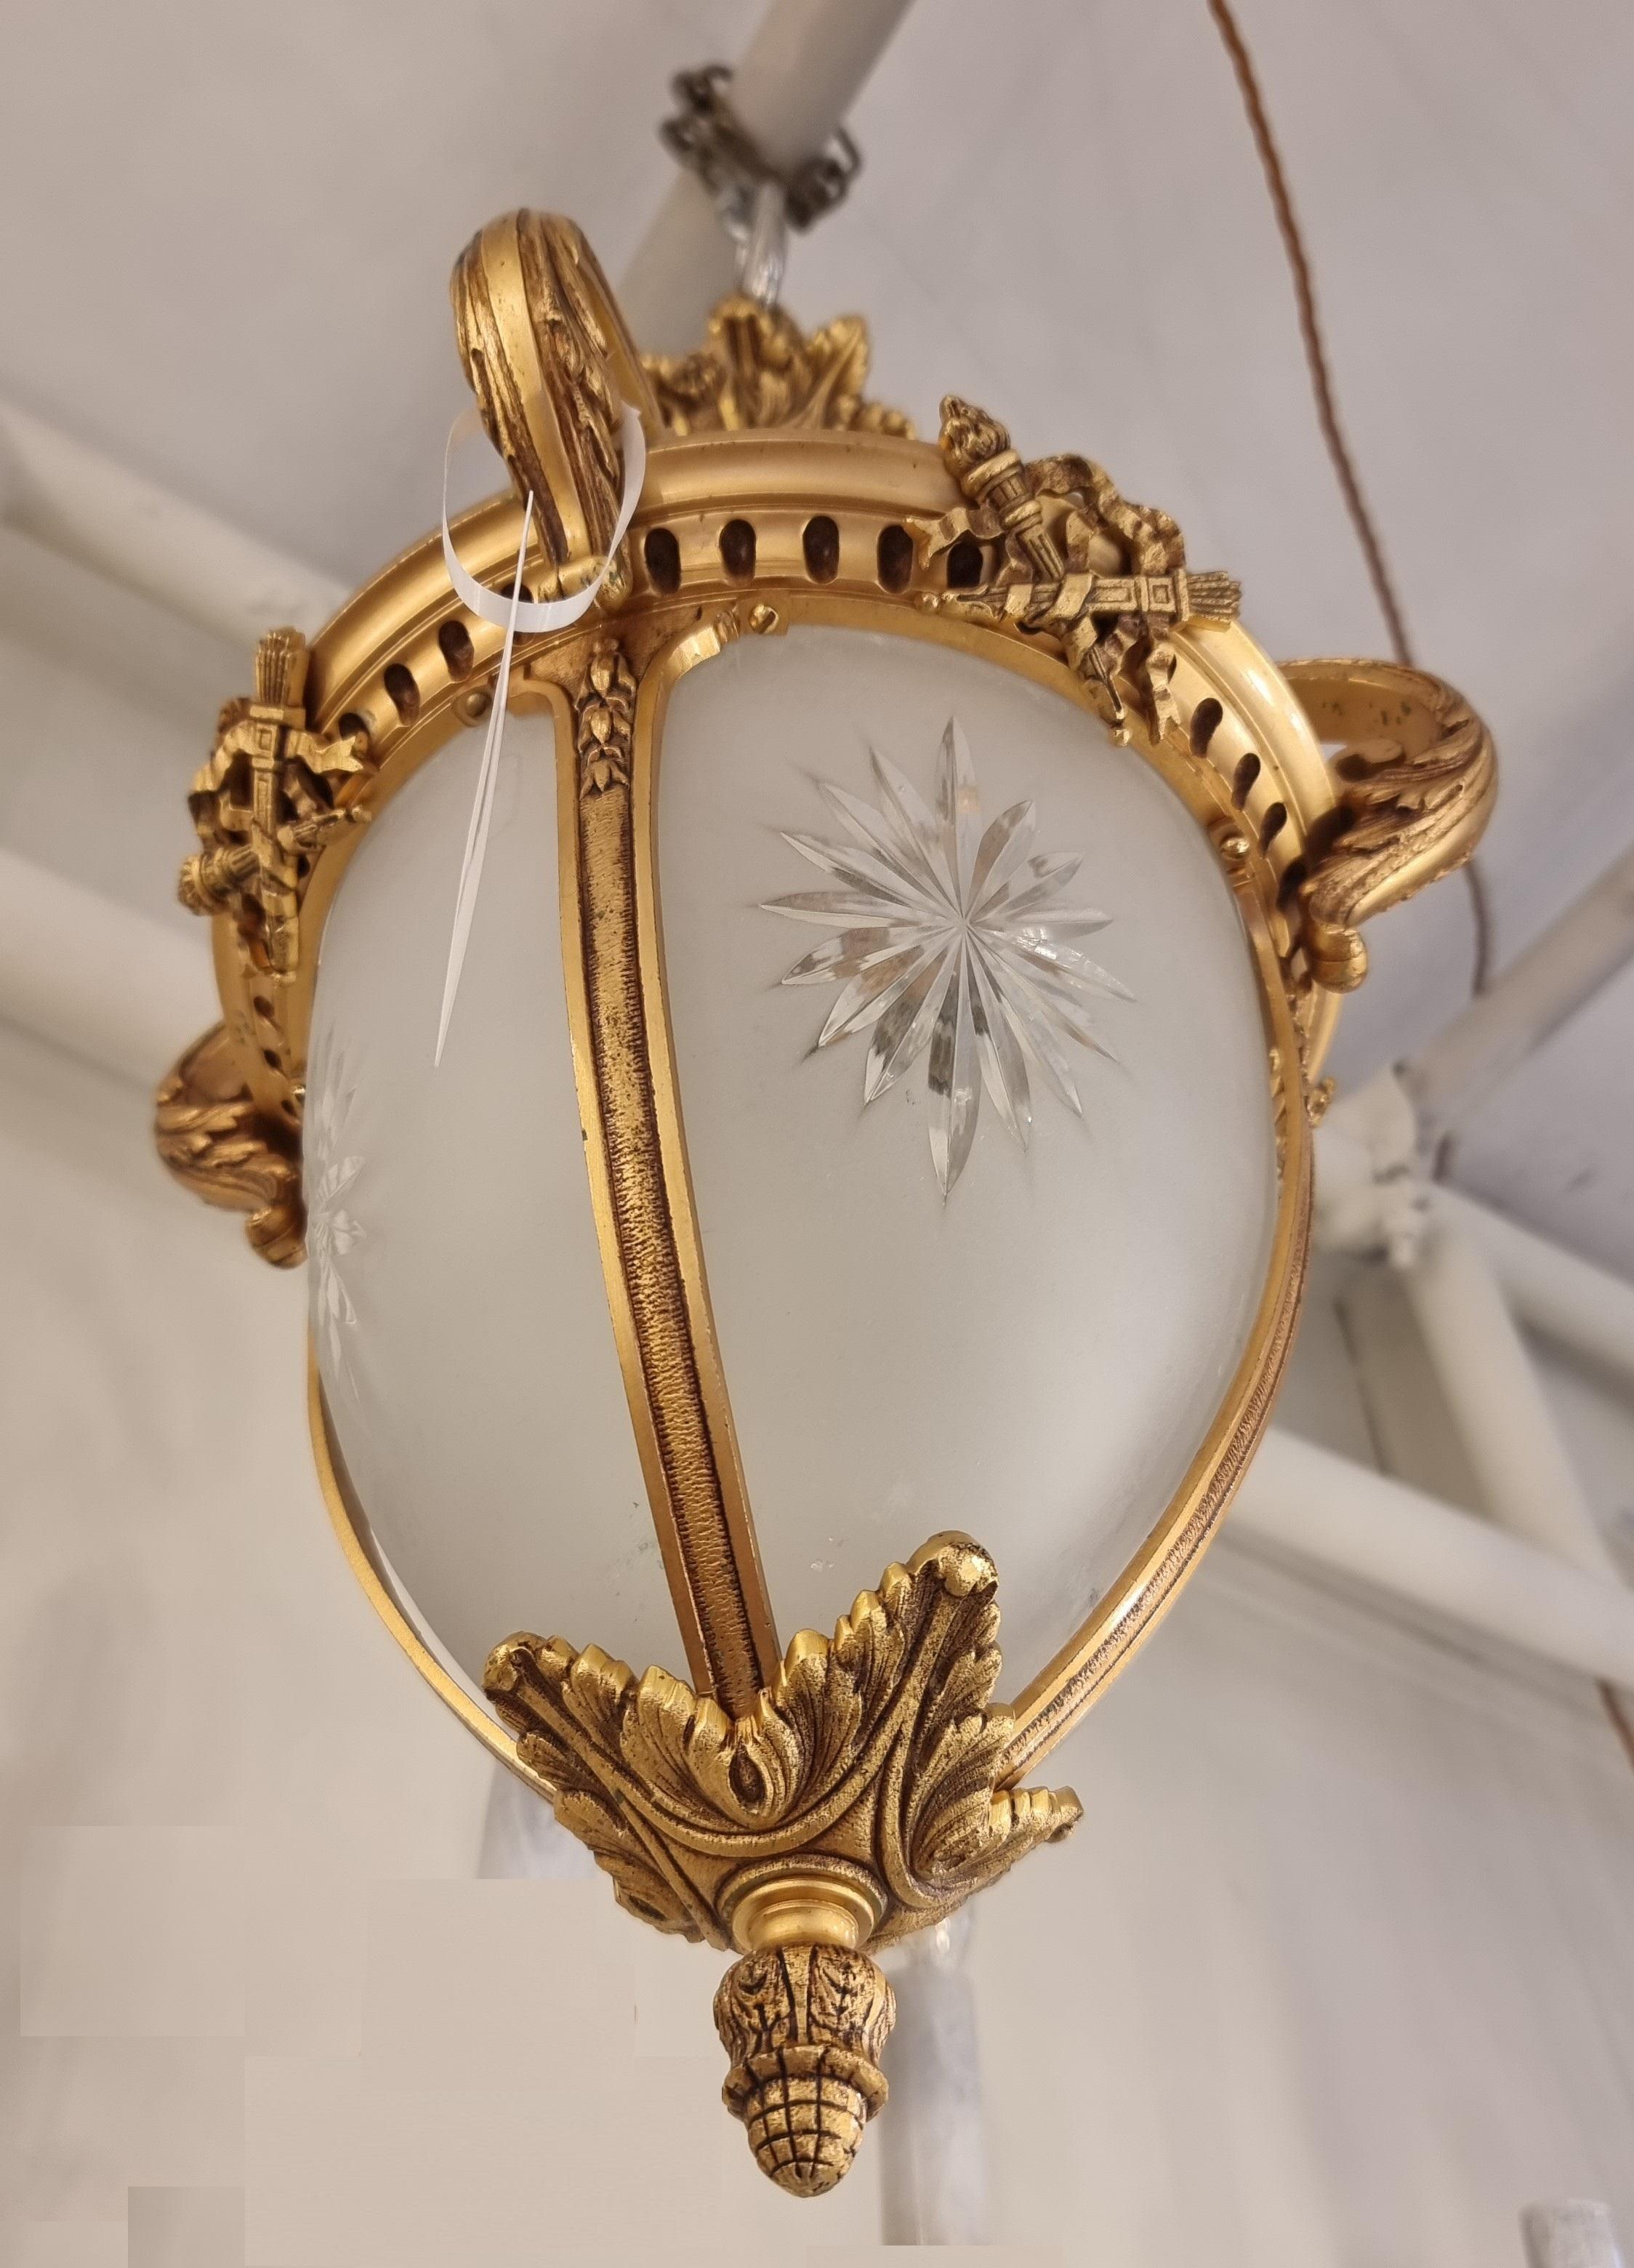 Fabulous French late 19th century lantern made of bronze. Beautiful etched glass surrounding a single bulb. Fully rewired for EU standard, we can be rewire to US standard for free. 